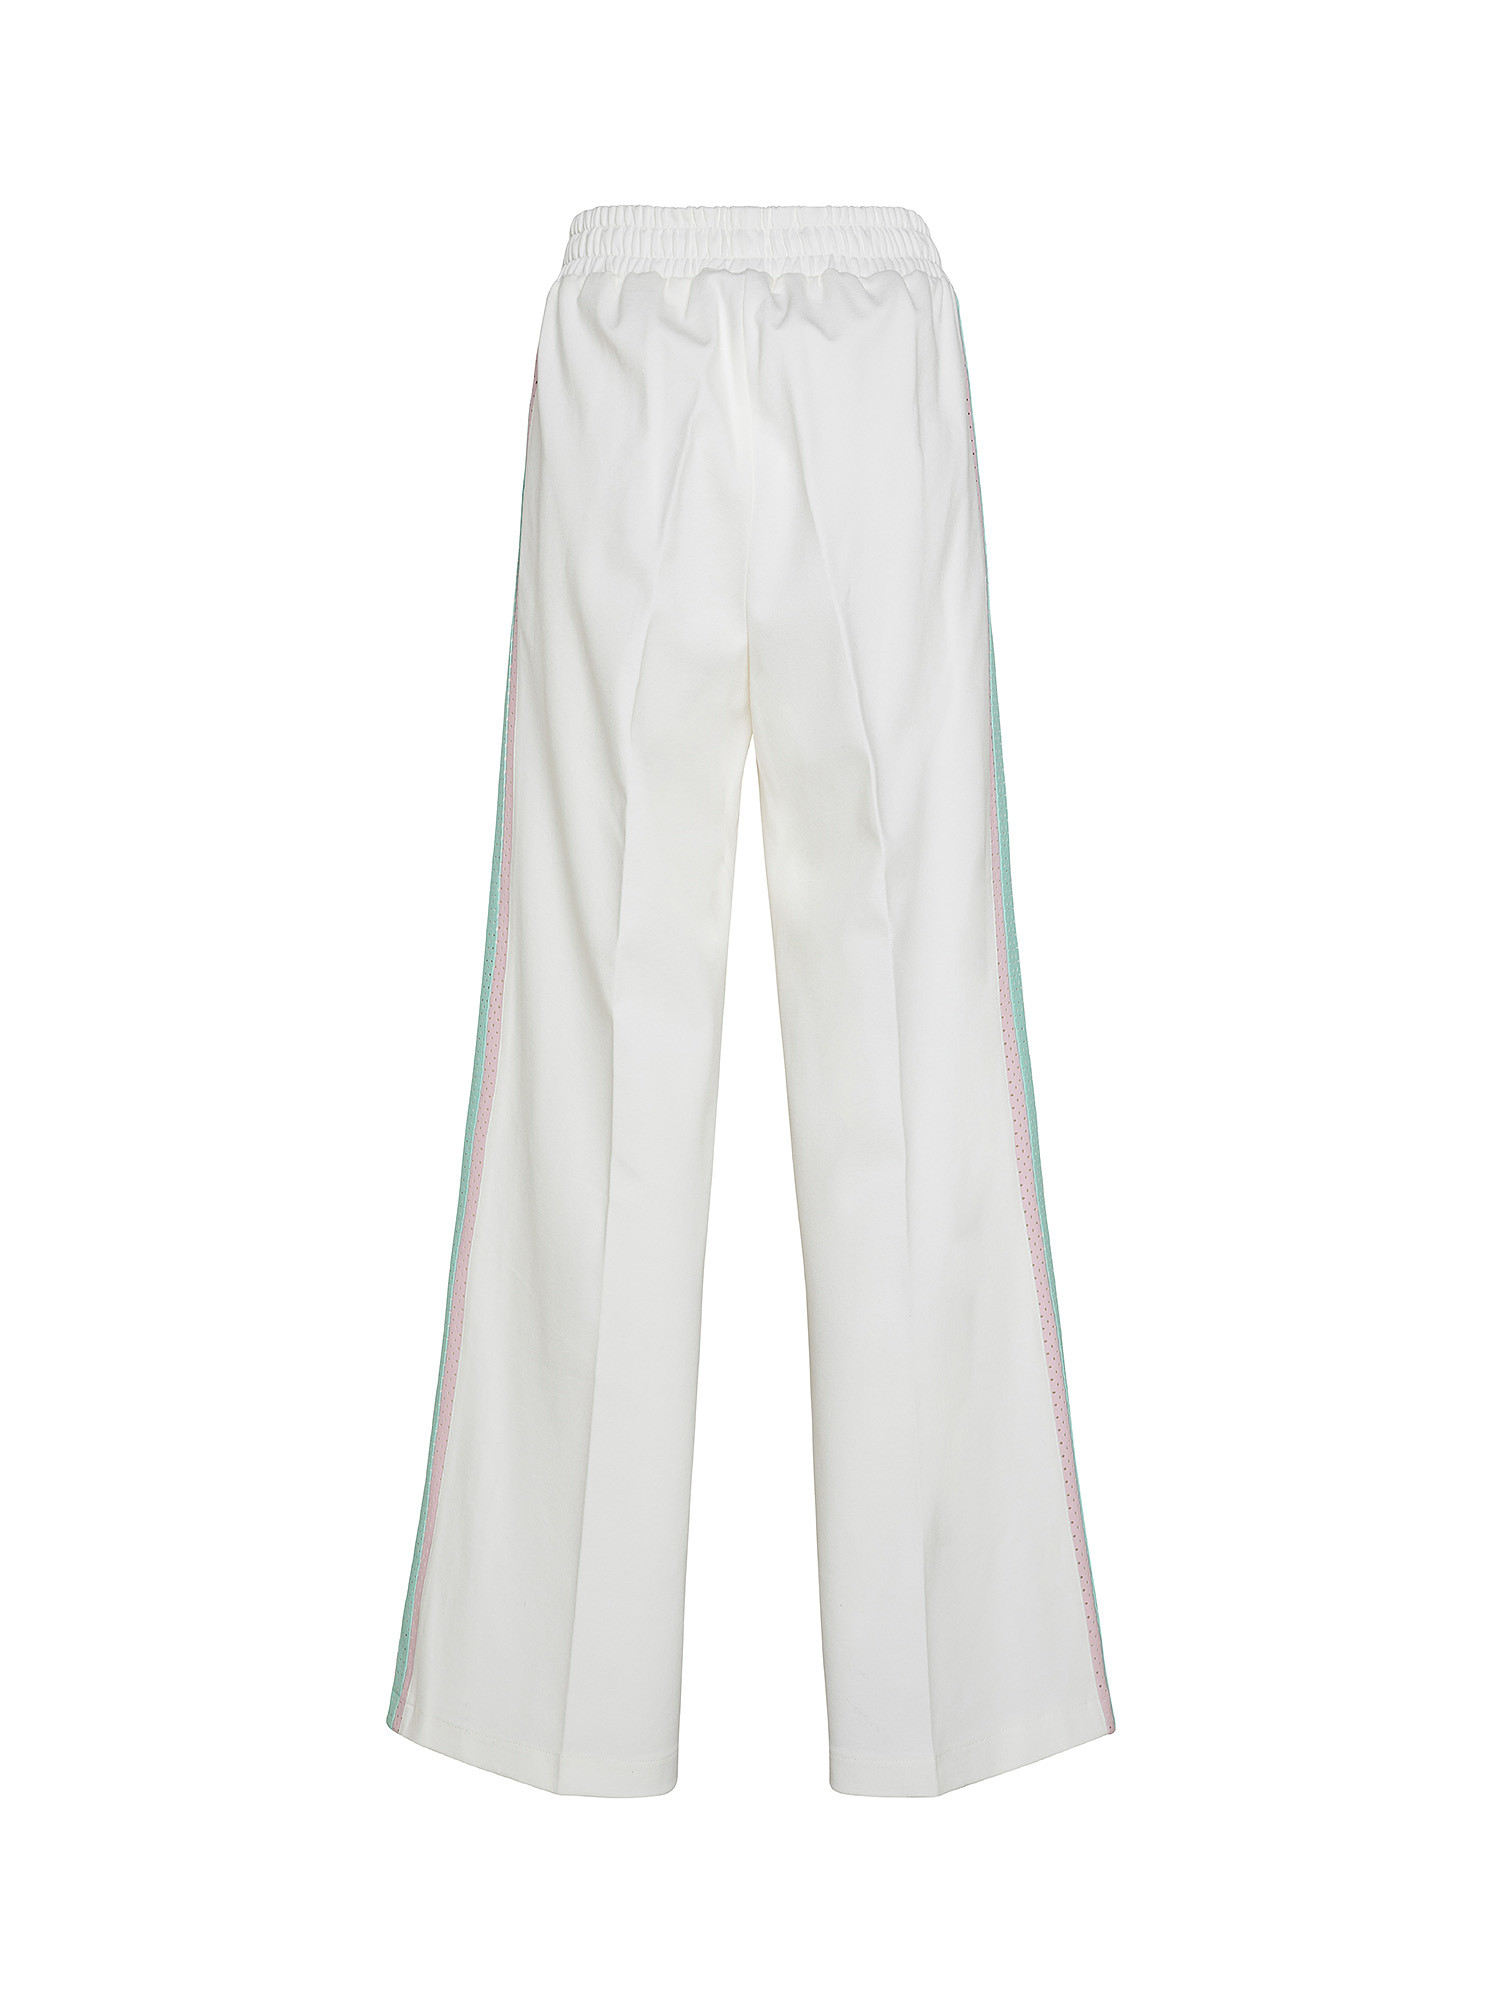 Trousers with perforated inserts, White, large image number 1